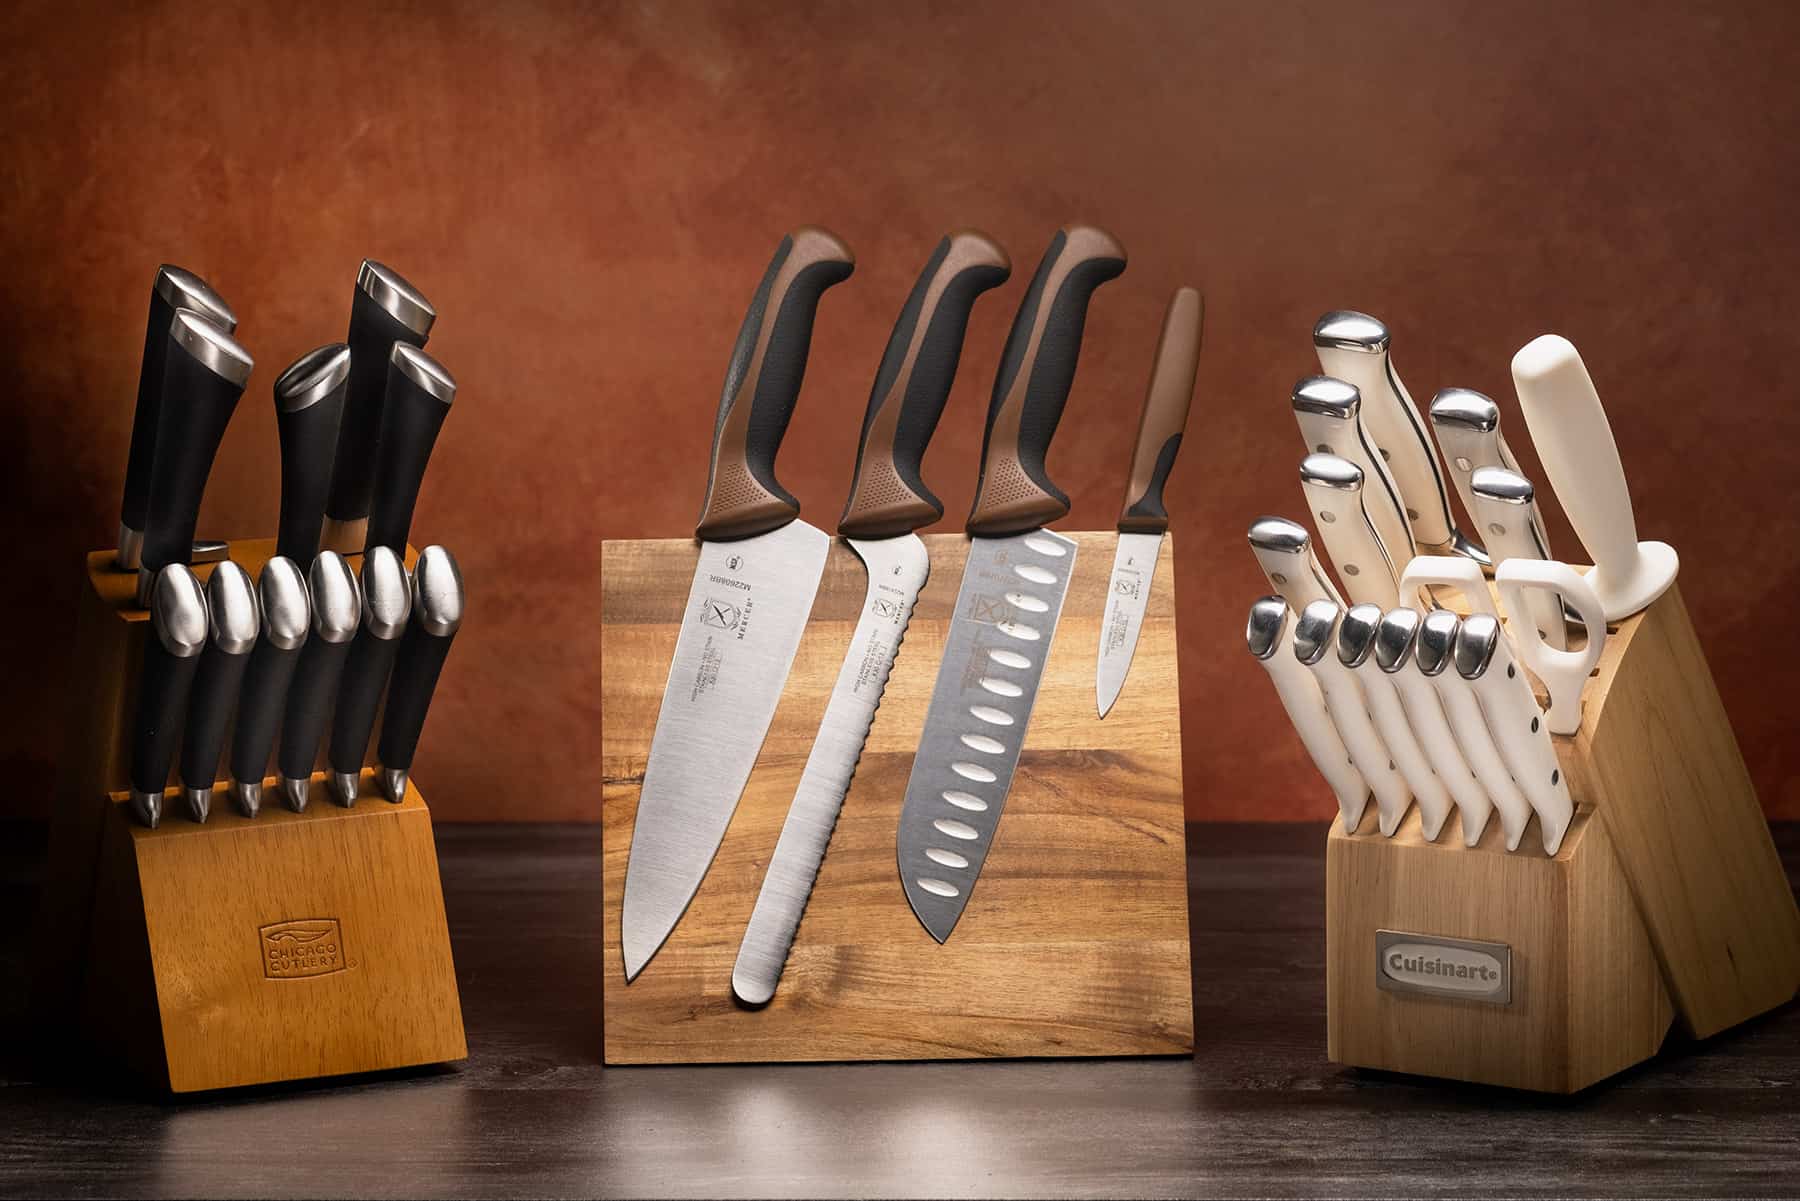 5 Piece Serrated Knife Set, Stainless Steel w/ Block - Bachelor On A Budget